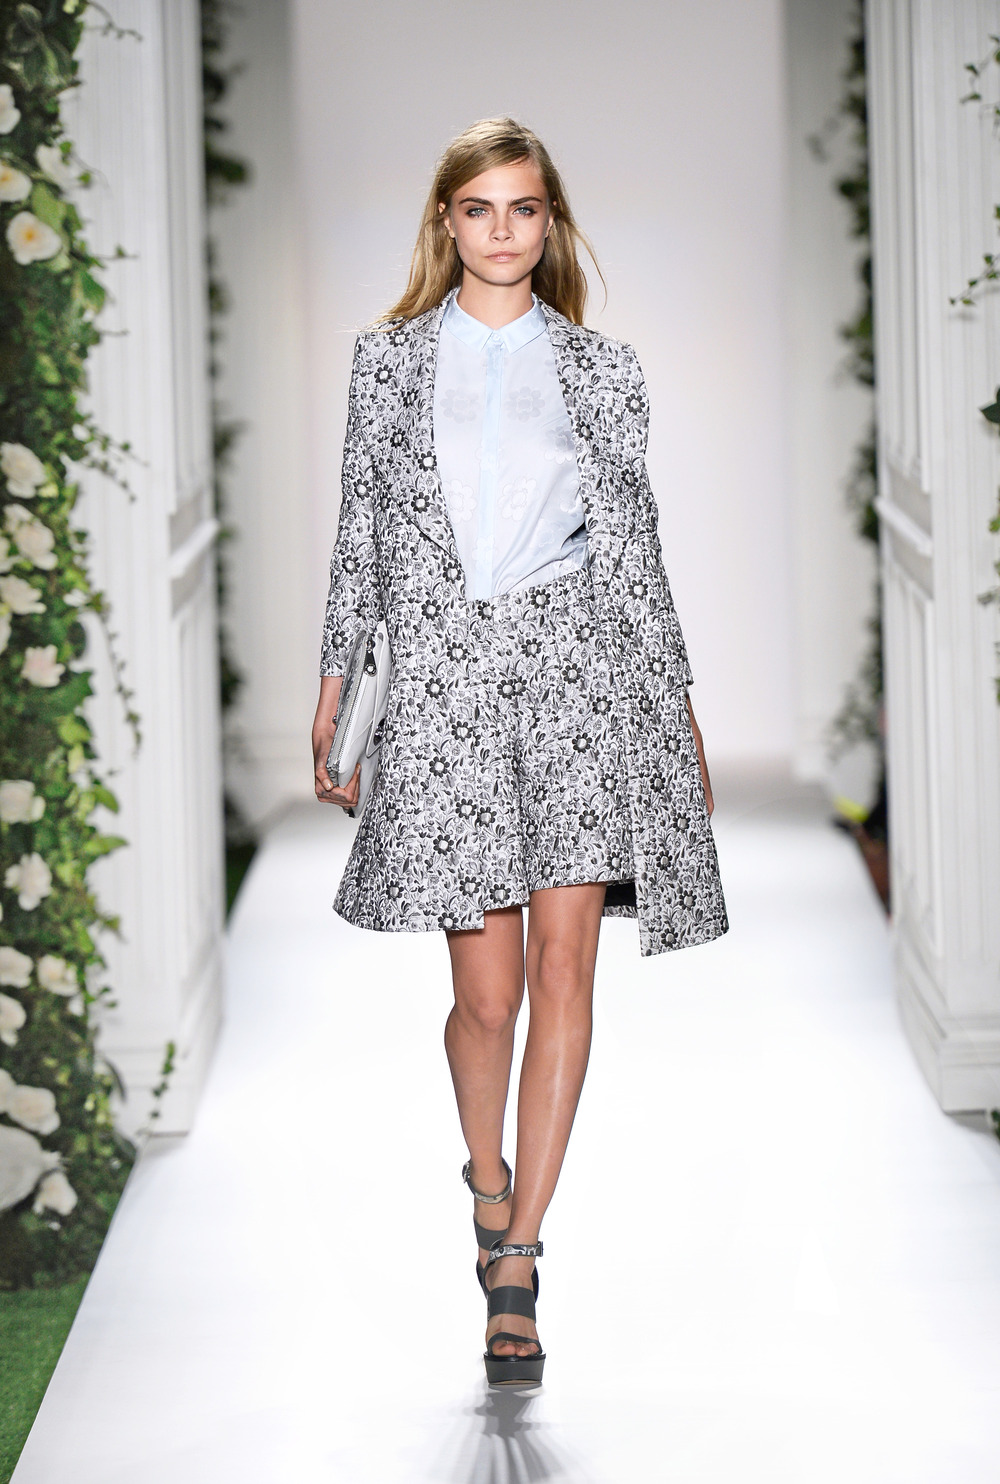 LFW | Mulberry SS14